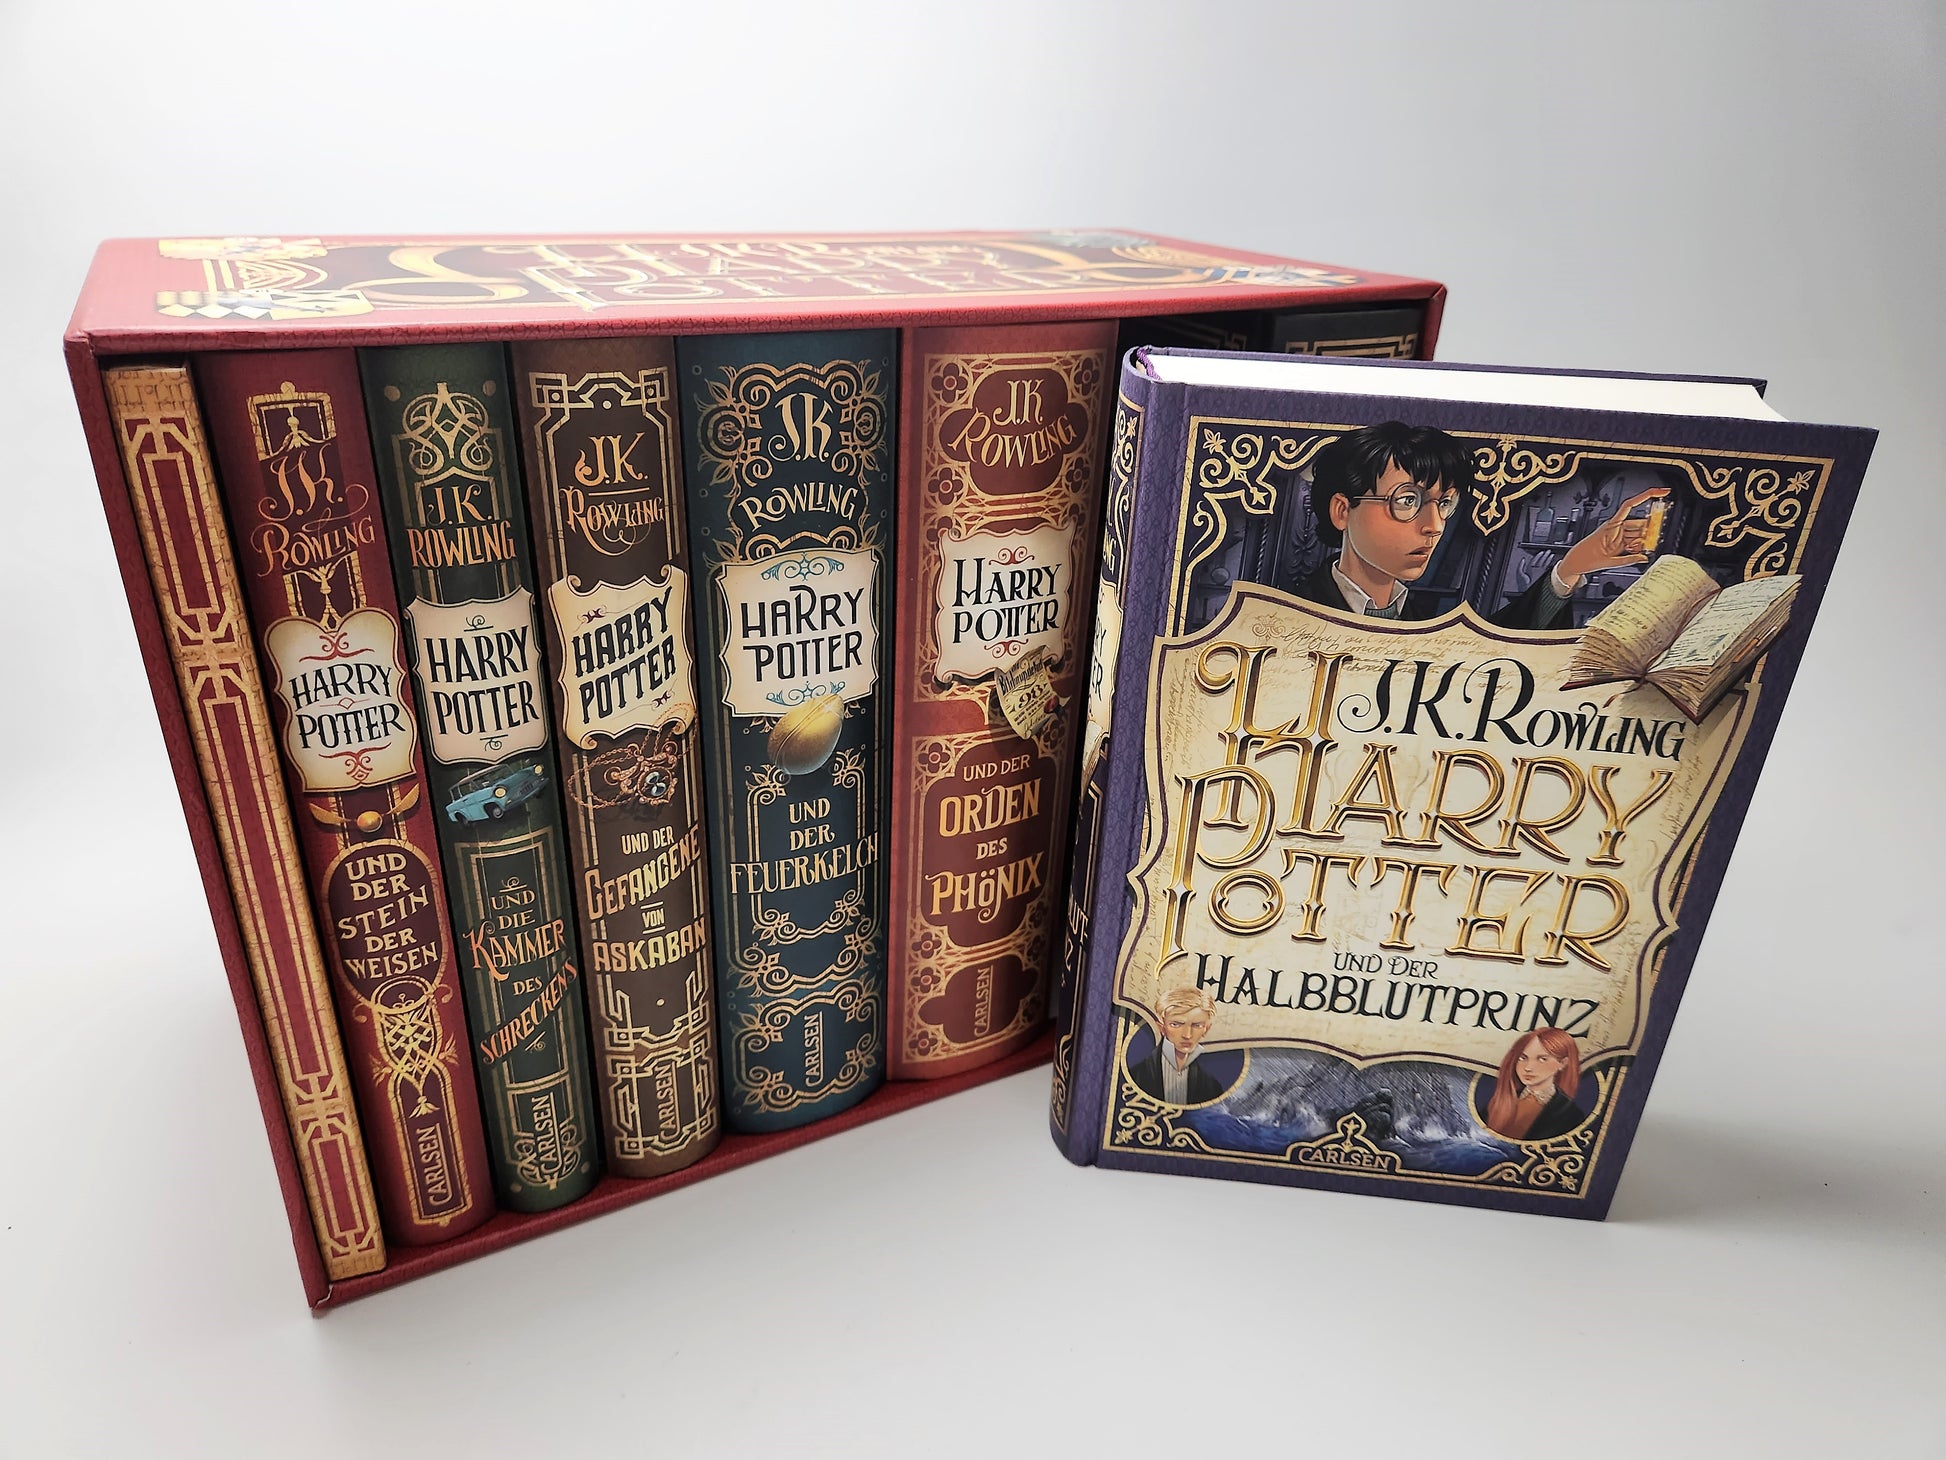 Behind the German 20th anniversary editions of the Harry Potter books